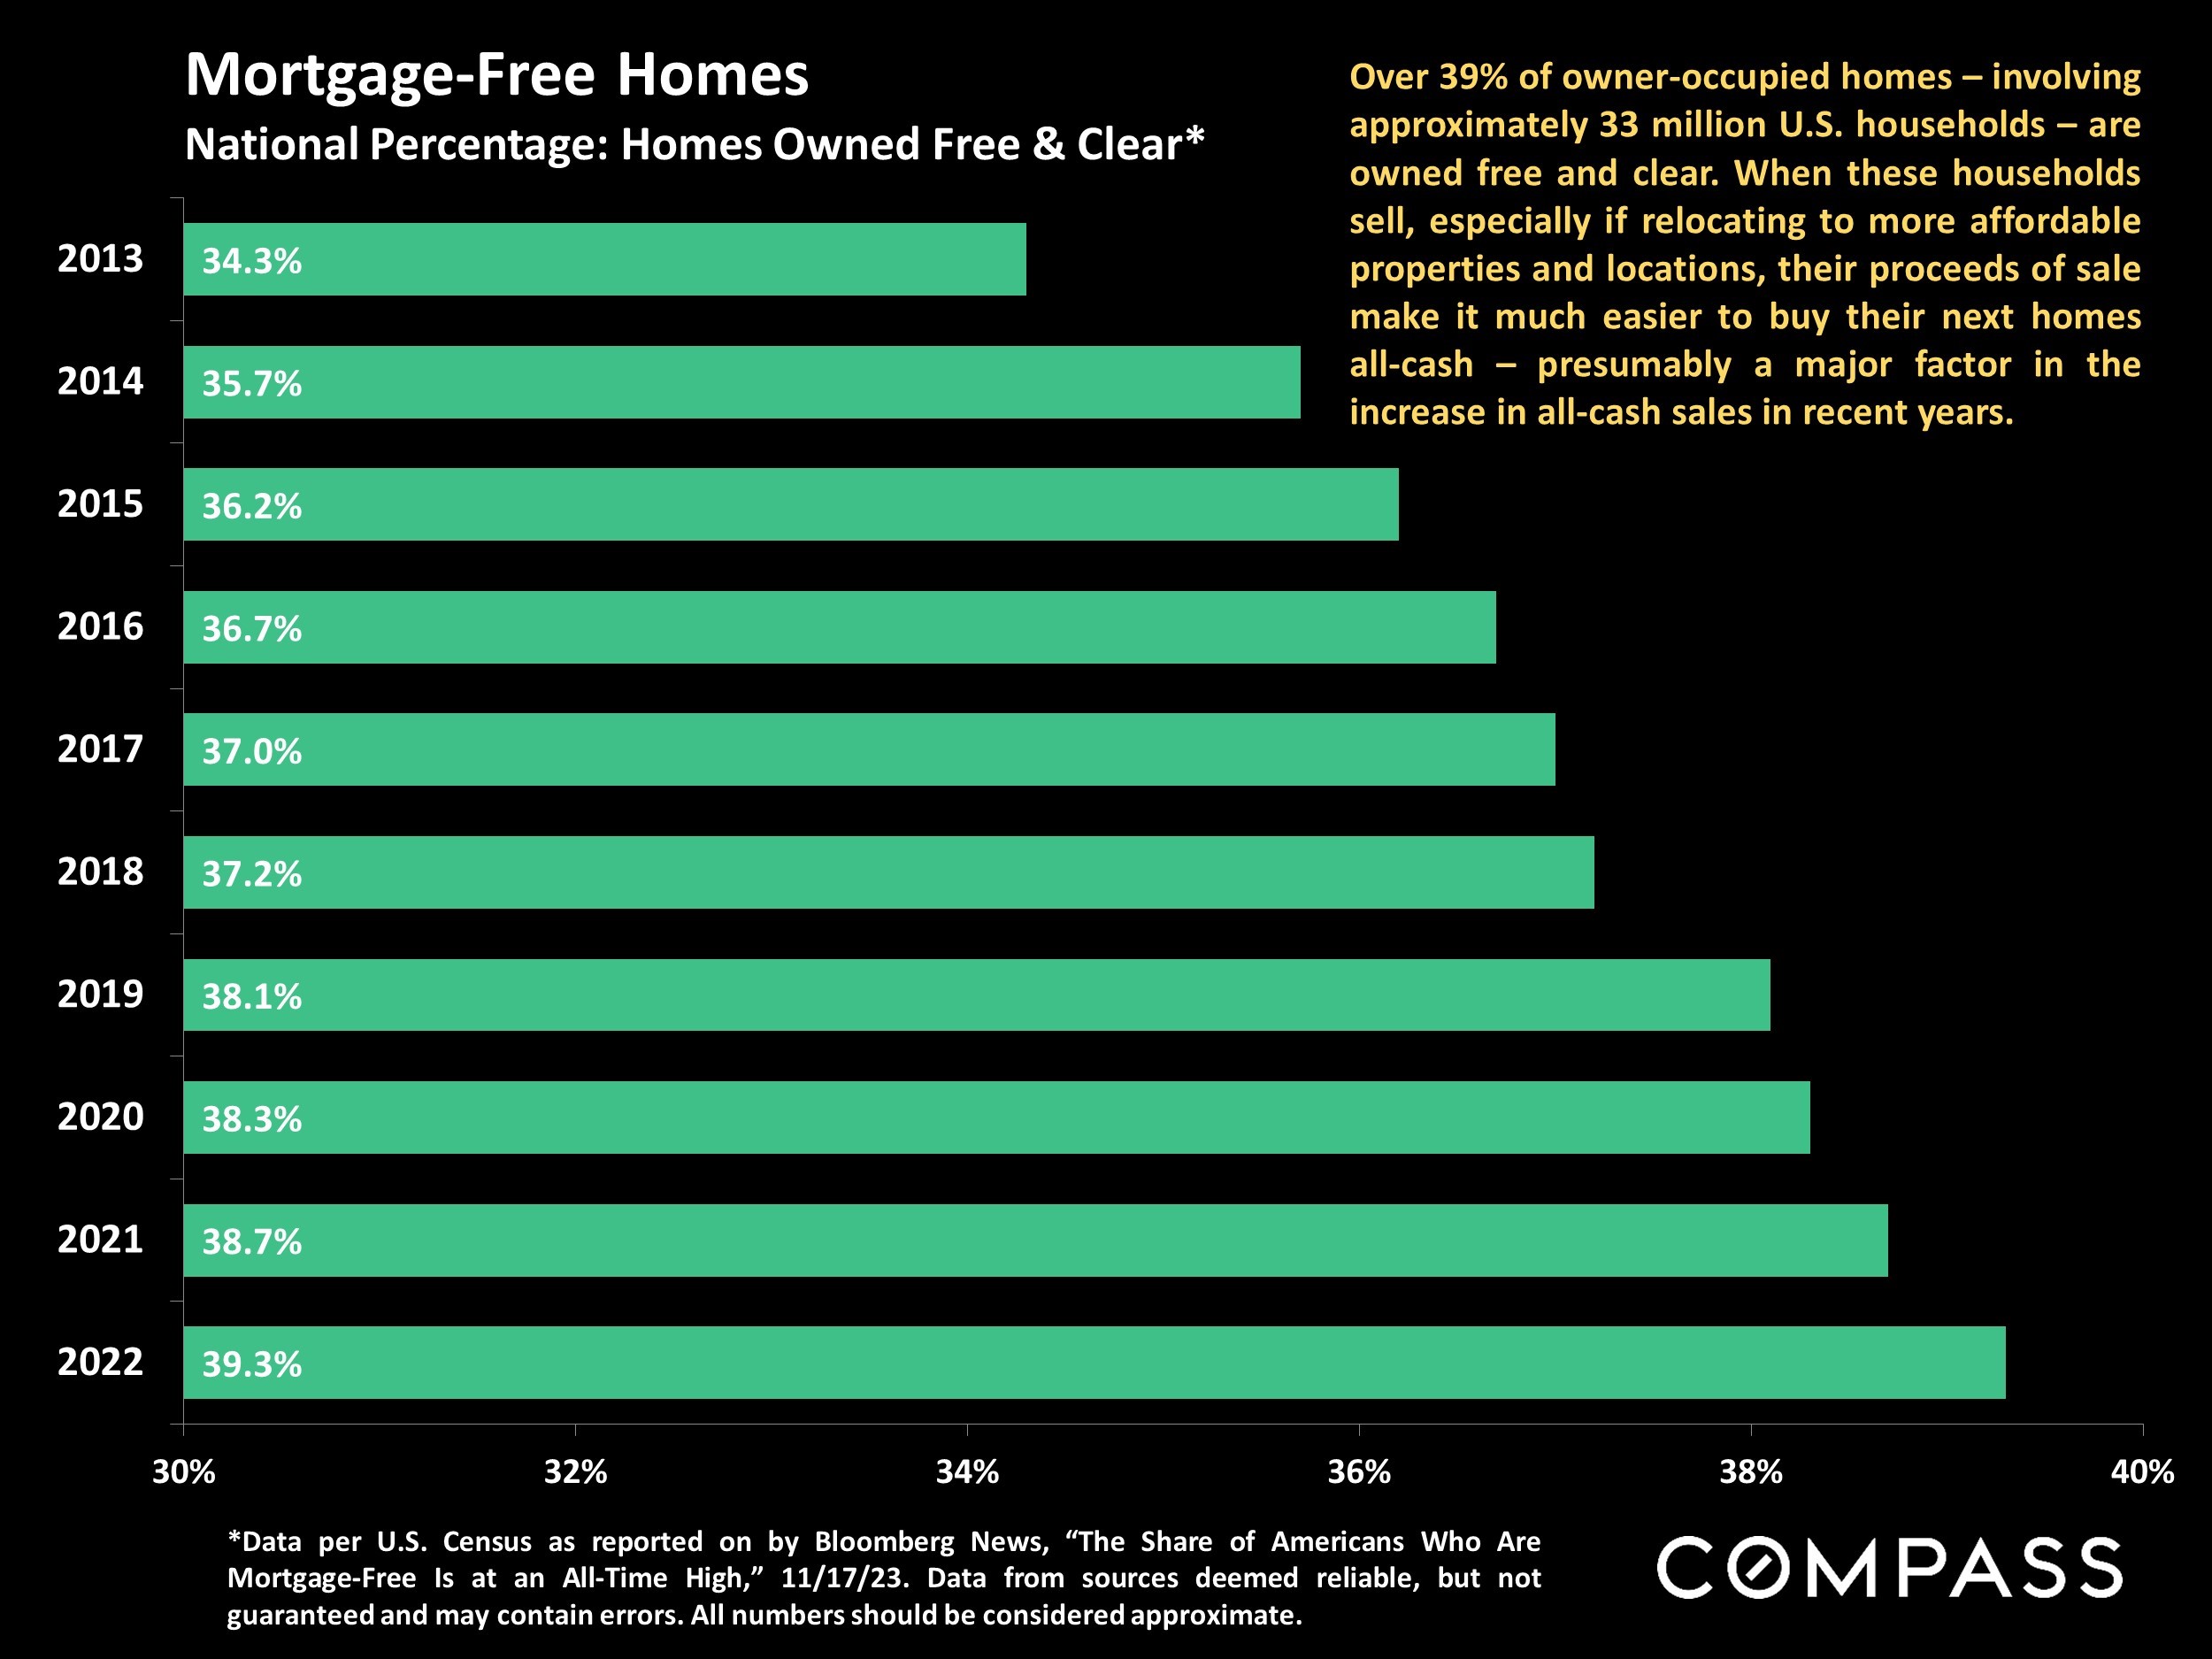 Mortgage-Free Homes National Percentage: Homes Owned Free & Clear*